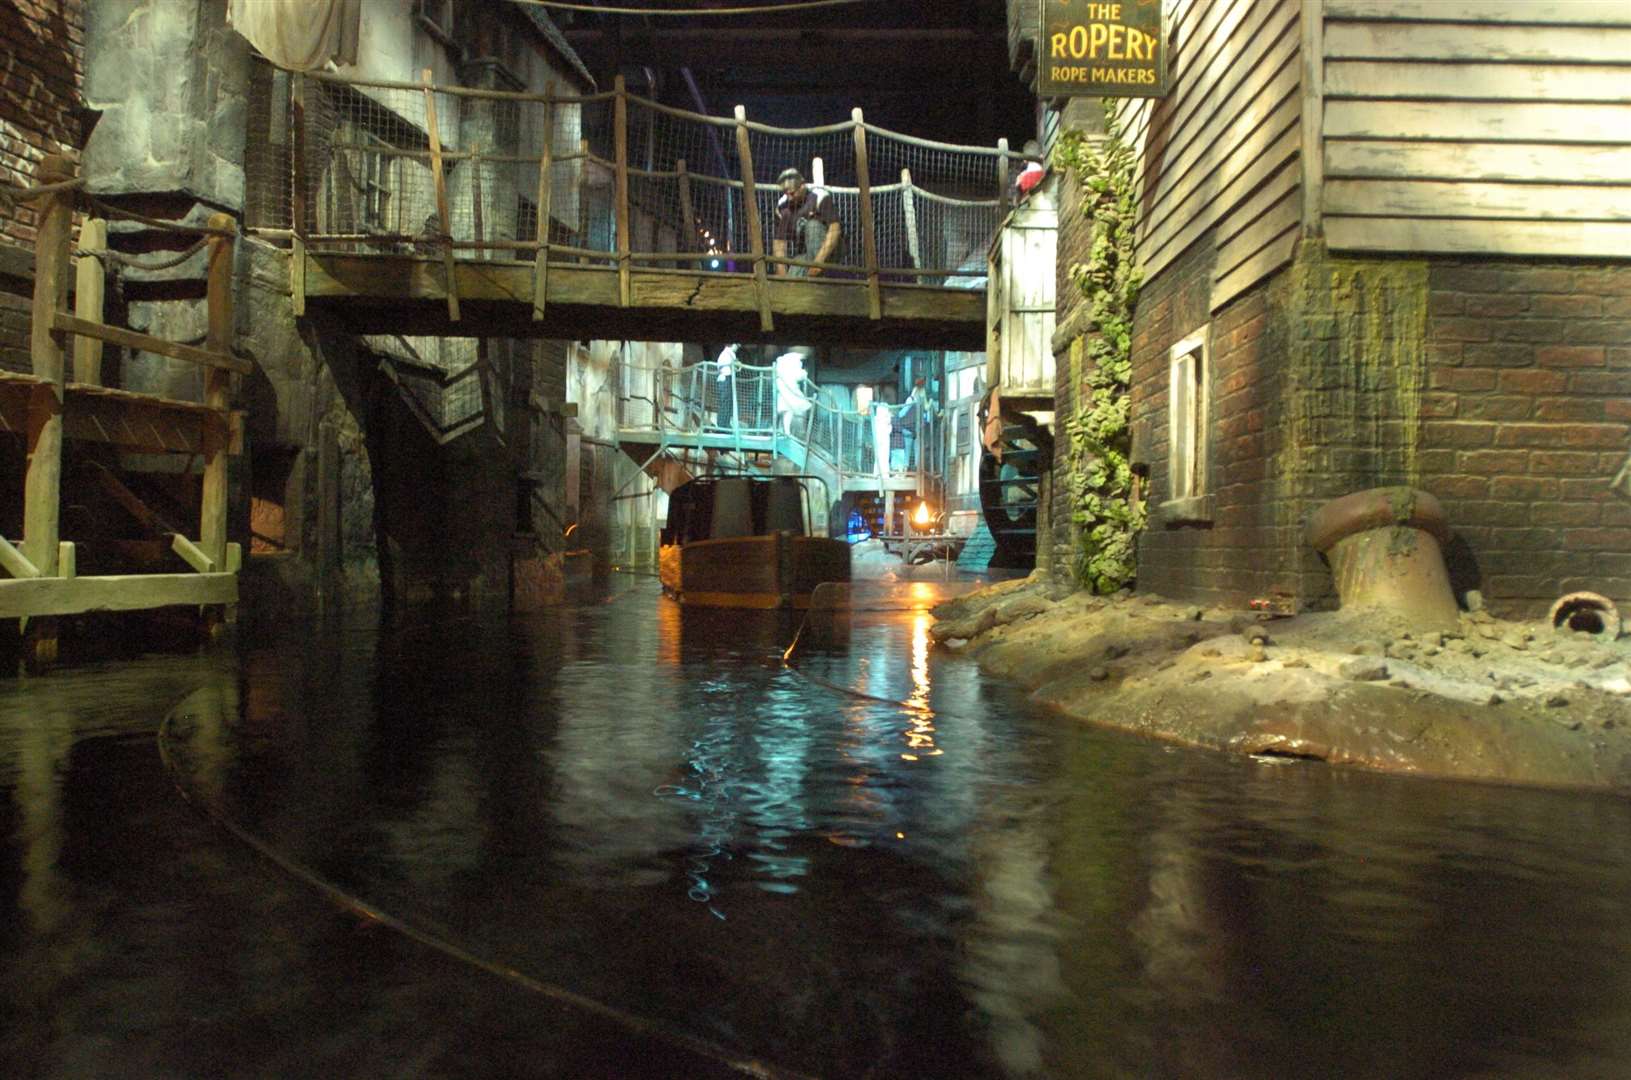 Visitors could float through the streets - and sewers - of Victoria England at Dickens World in Chatham